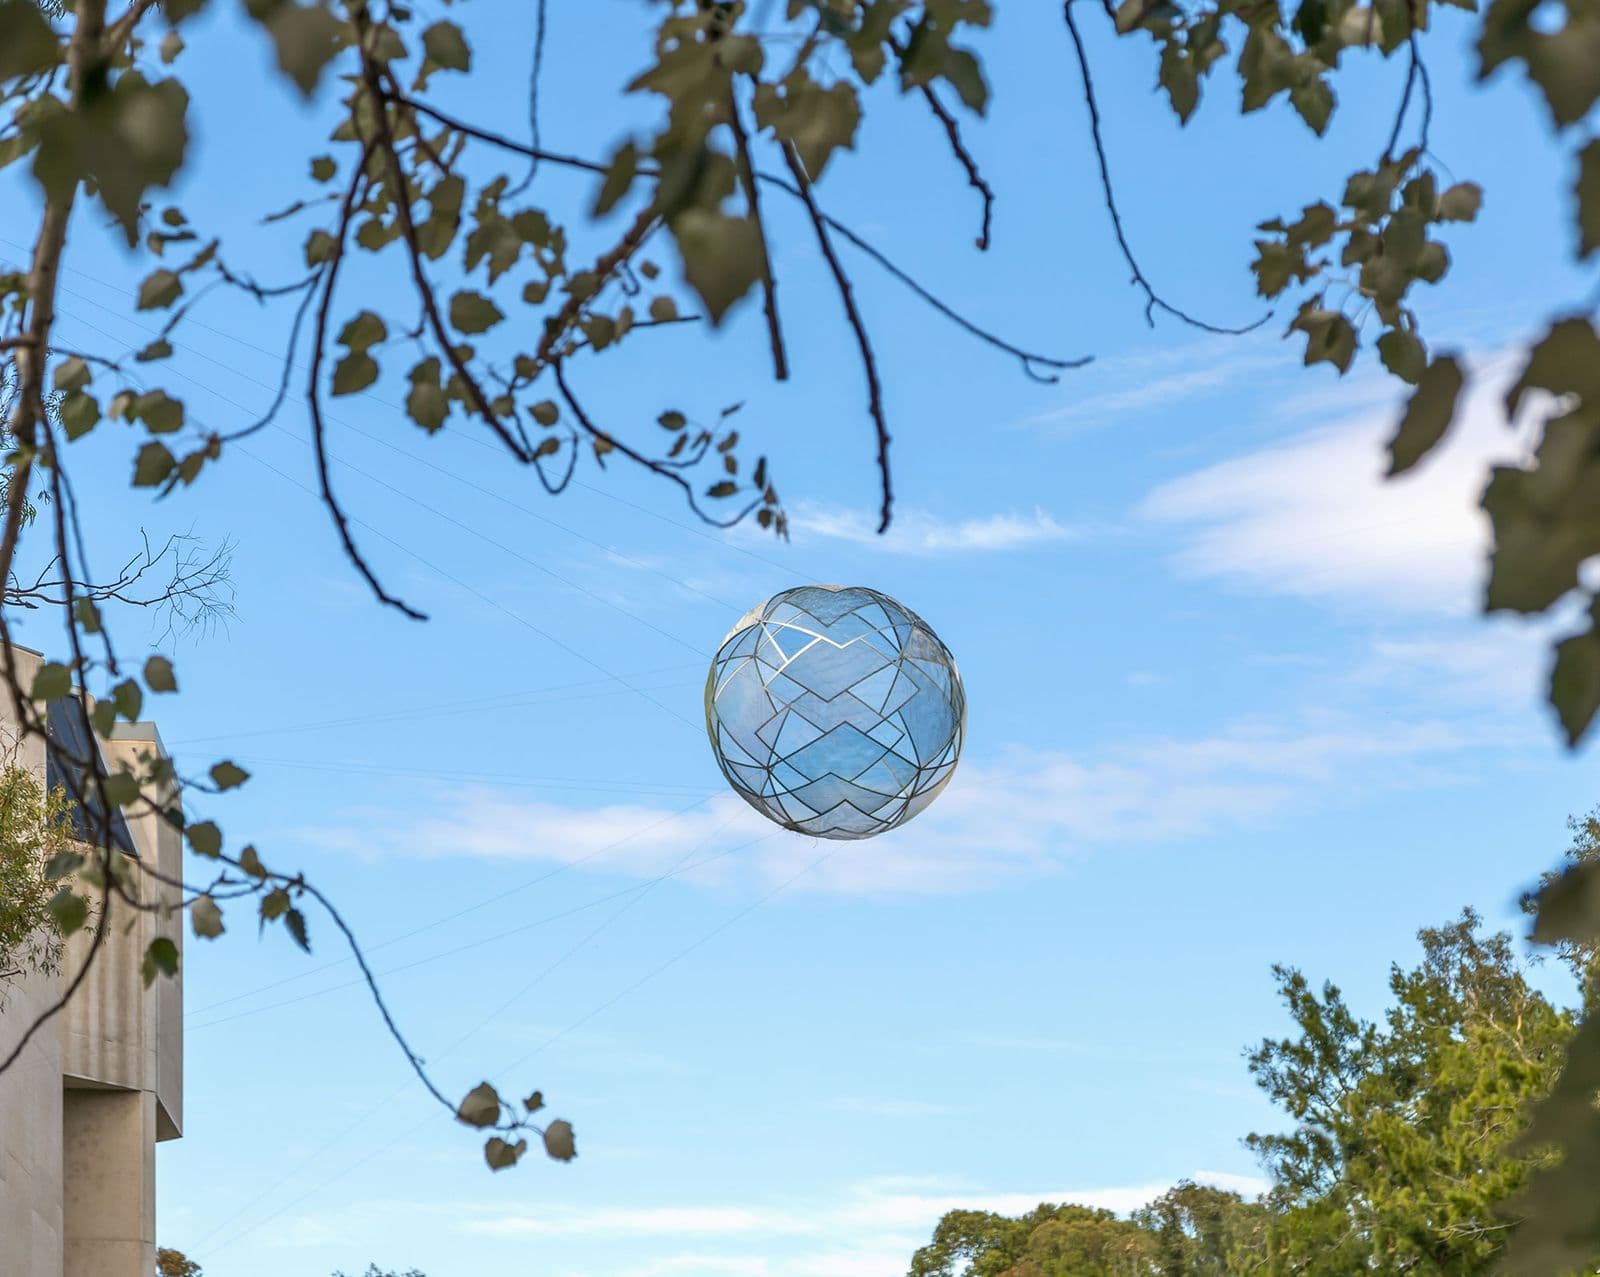 A large spherical sculpture hanging from large wires in the sky is visible through a gap in tree branches